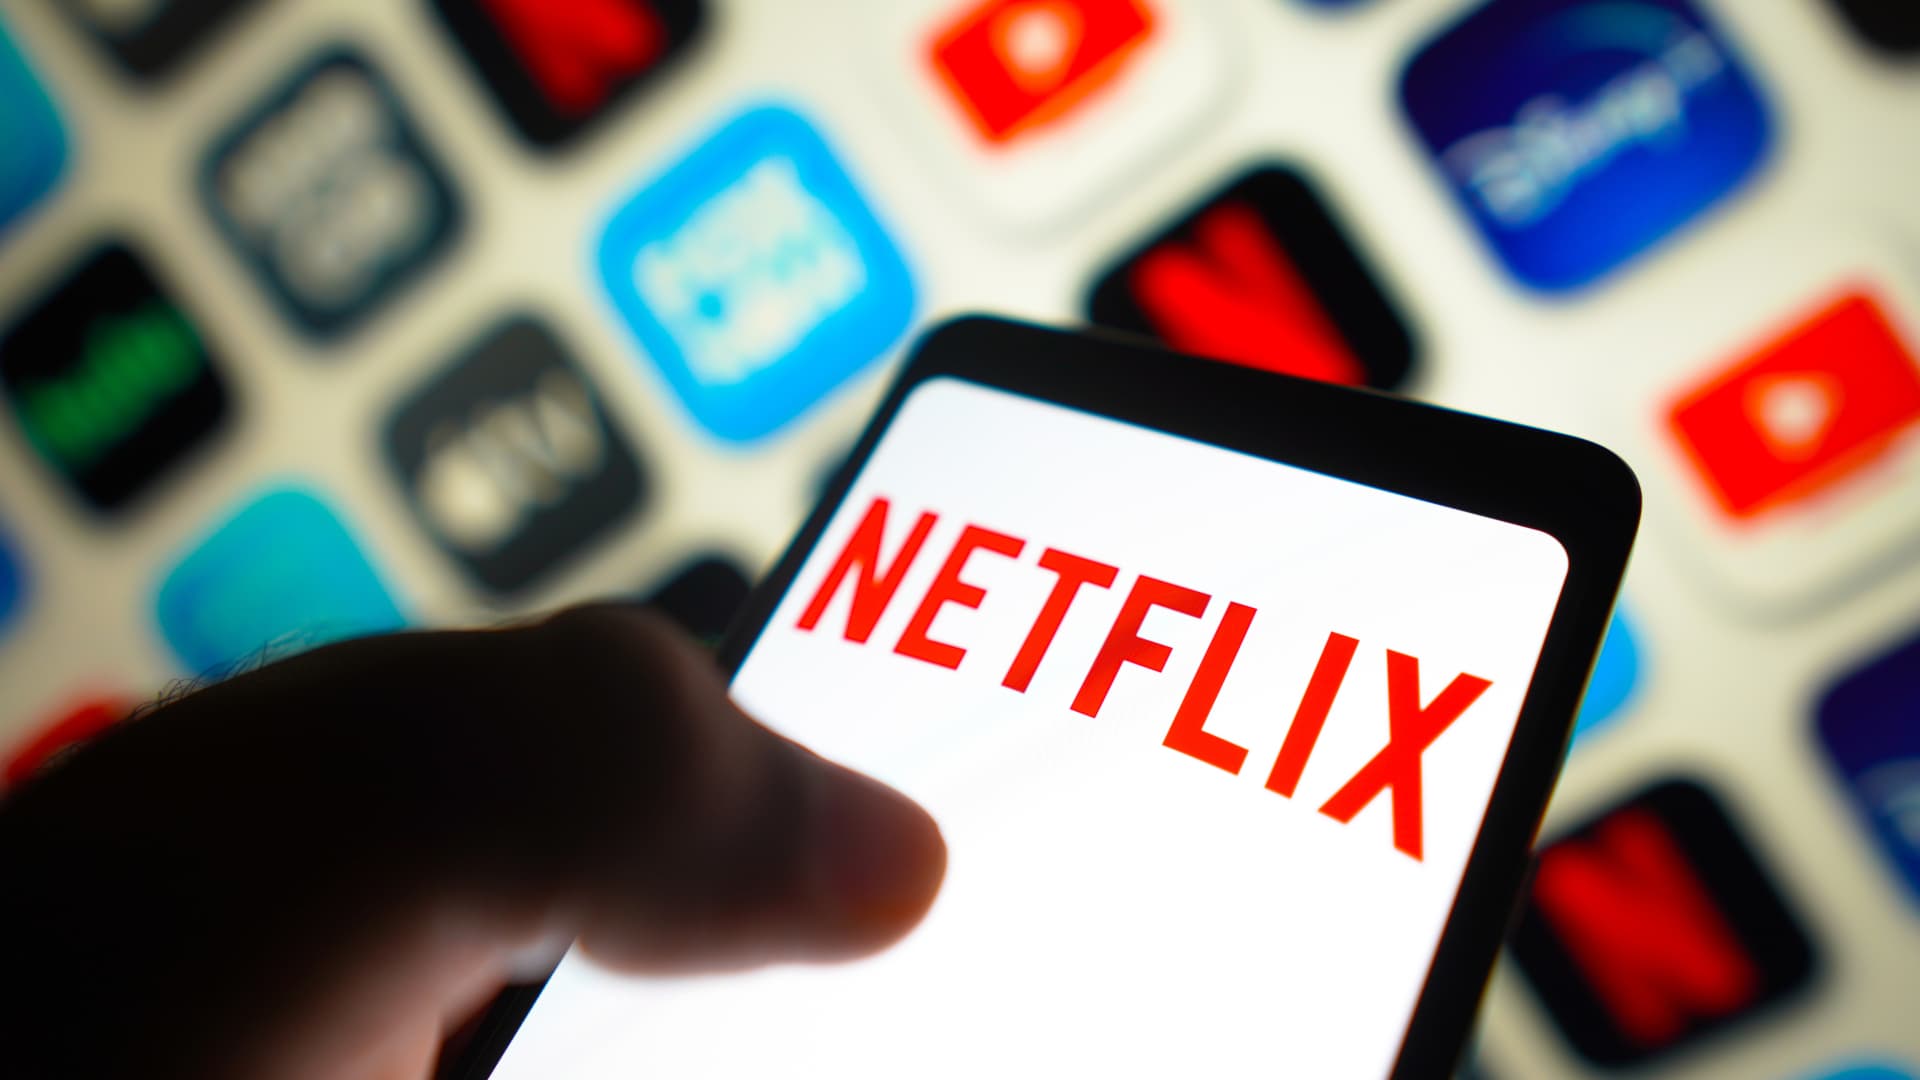 Netflix Hits Big with 40 Million Viewers on Cheaper Ad Plan, Steps Up with NFL Games and Live Boxing